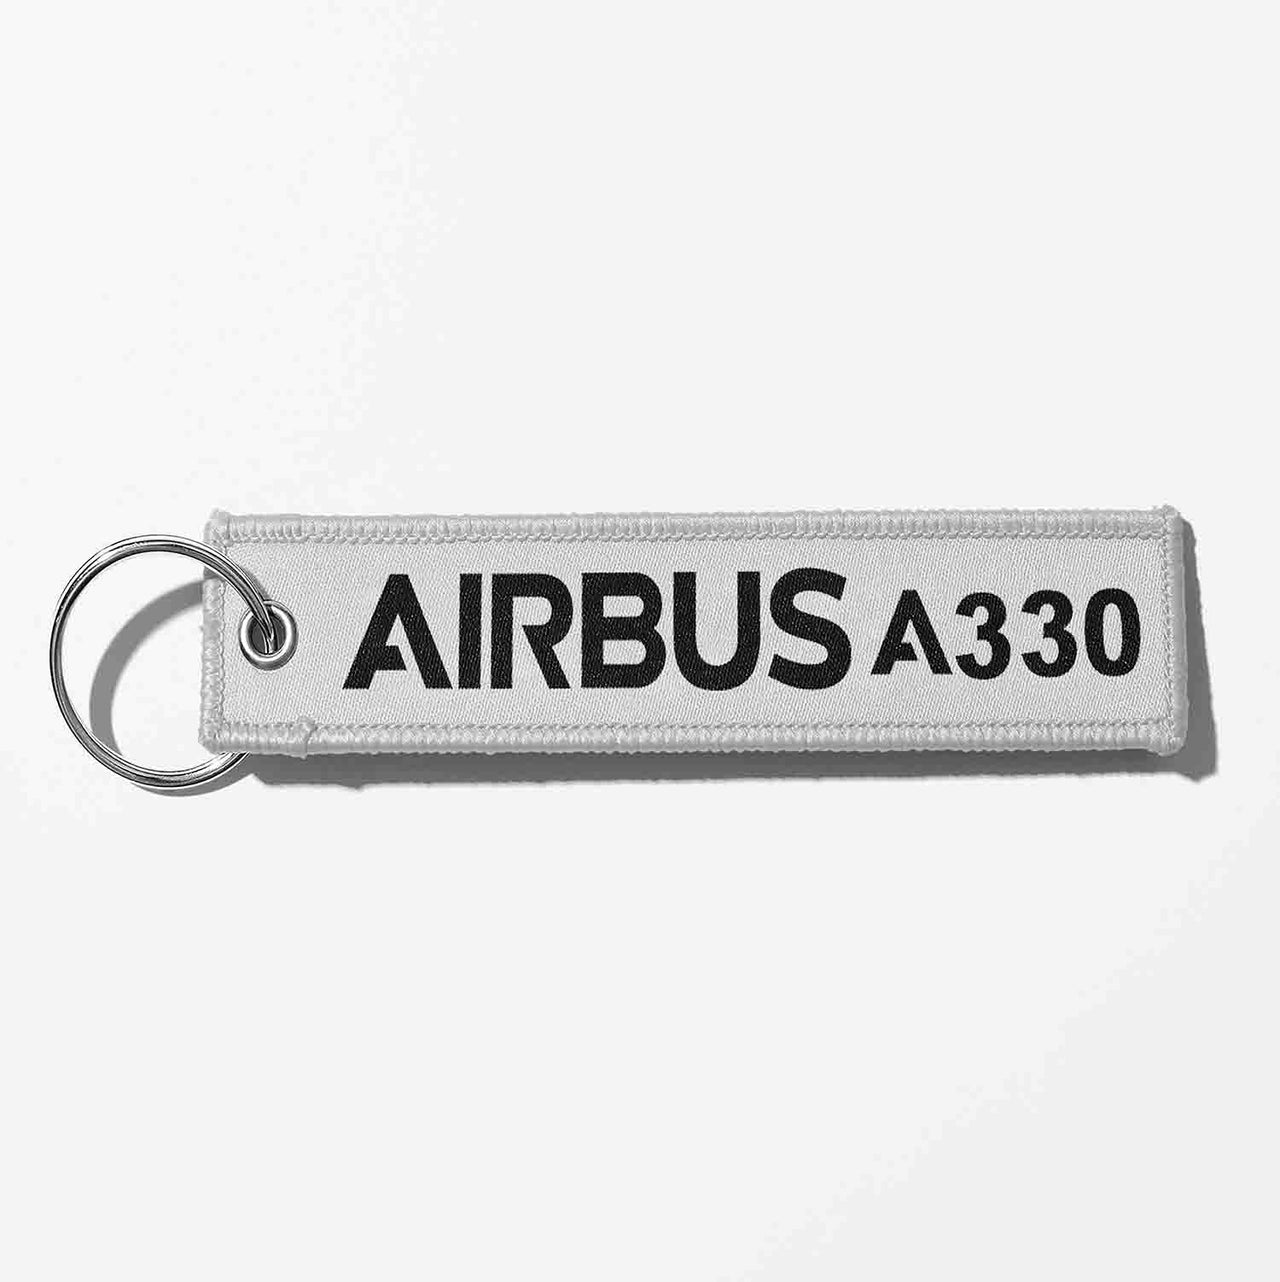 Airbus A330 & Text Designed Key Chains